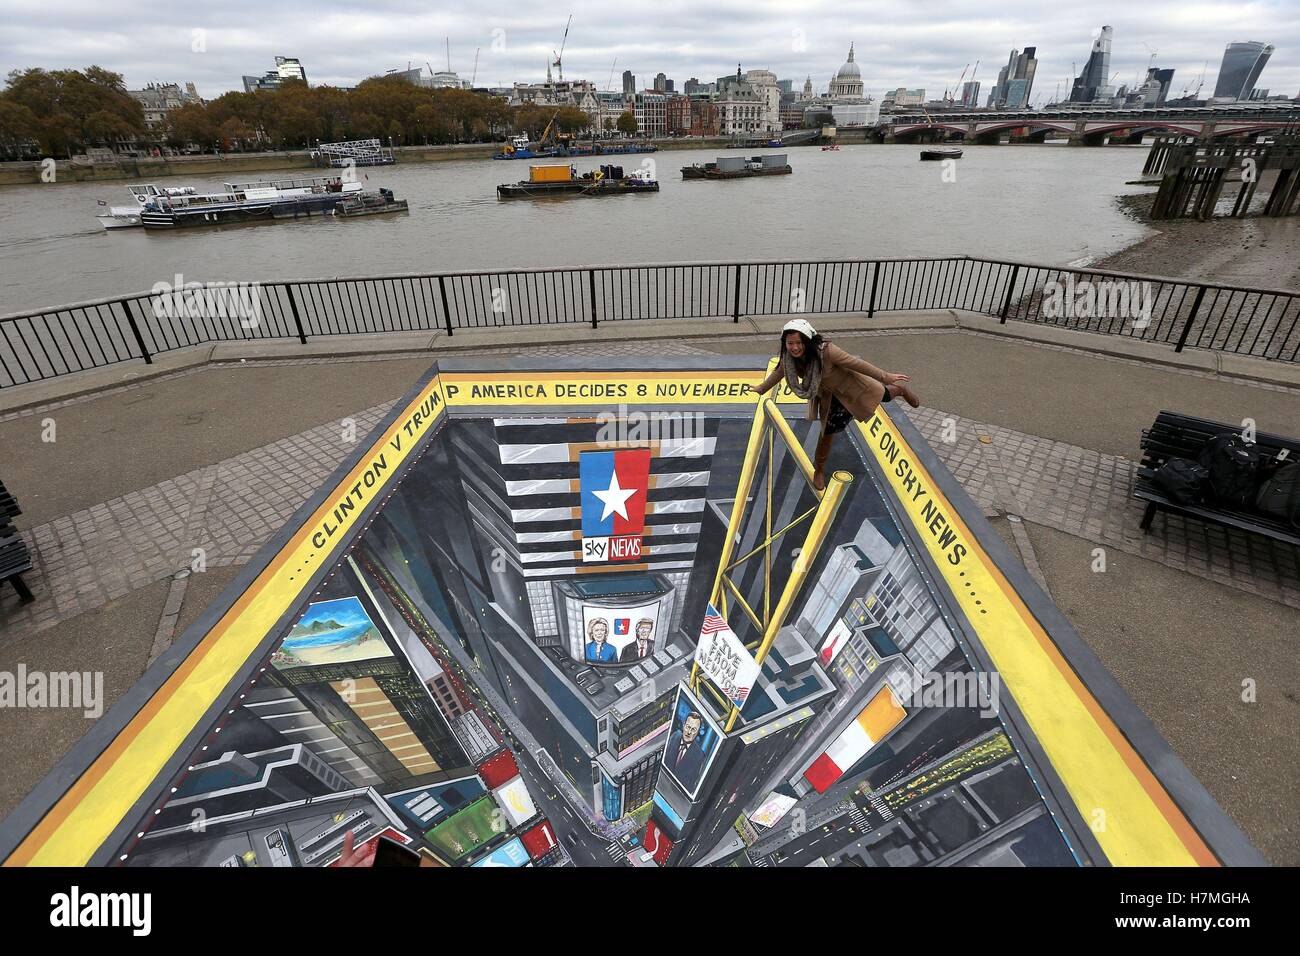 A woman balances on the edge of a 3D visualisation of Times Square, New York, created by street artist Joe Hill at Observation Point on London's South Bank. Stock Photo